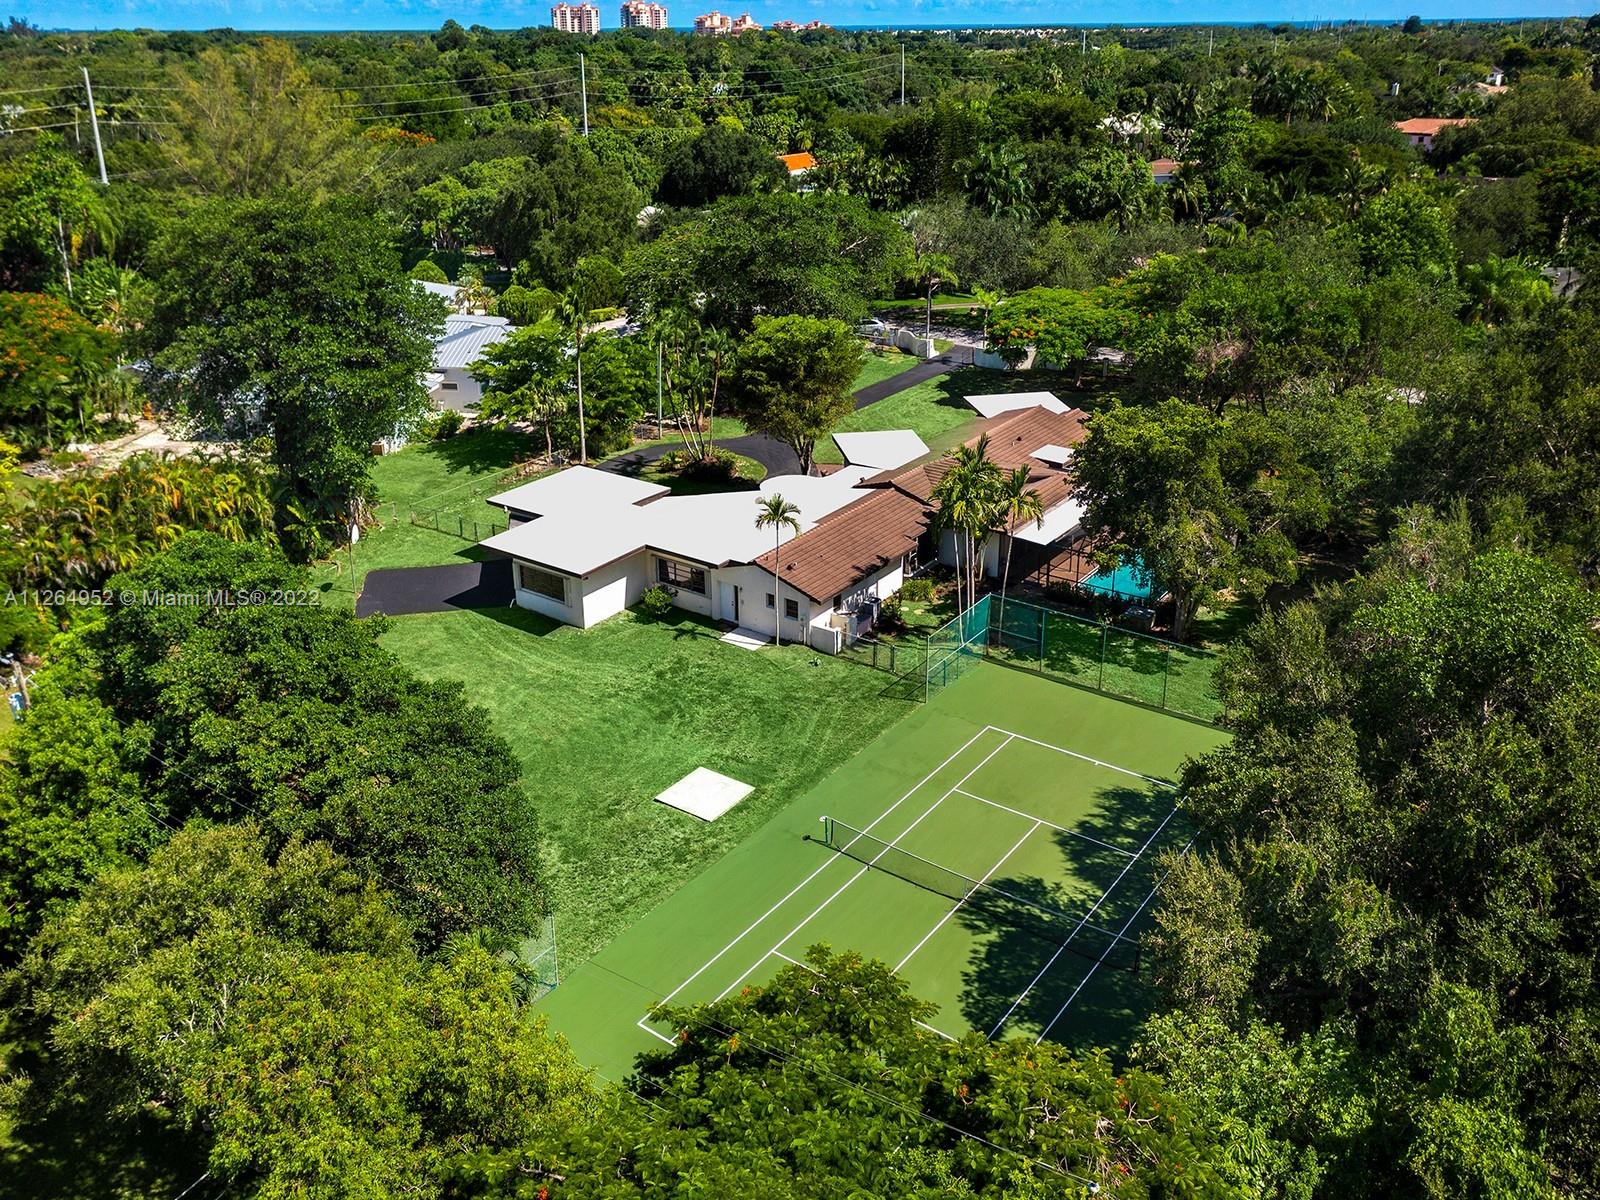 Incredible opportunity to build your 18,000+ Sq.Ft dream home on this 1.52 Acre lot with a tennis court. Or you could renovate this existing home offering 5 bedrooms and 3/1 bathrooms plus guest/in-law suite with private access. Enjoy a vast outdoor space with screened pool/patio and a huge front and back yard. Being sold for land value.